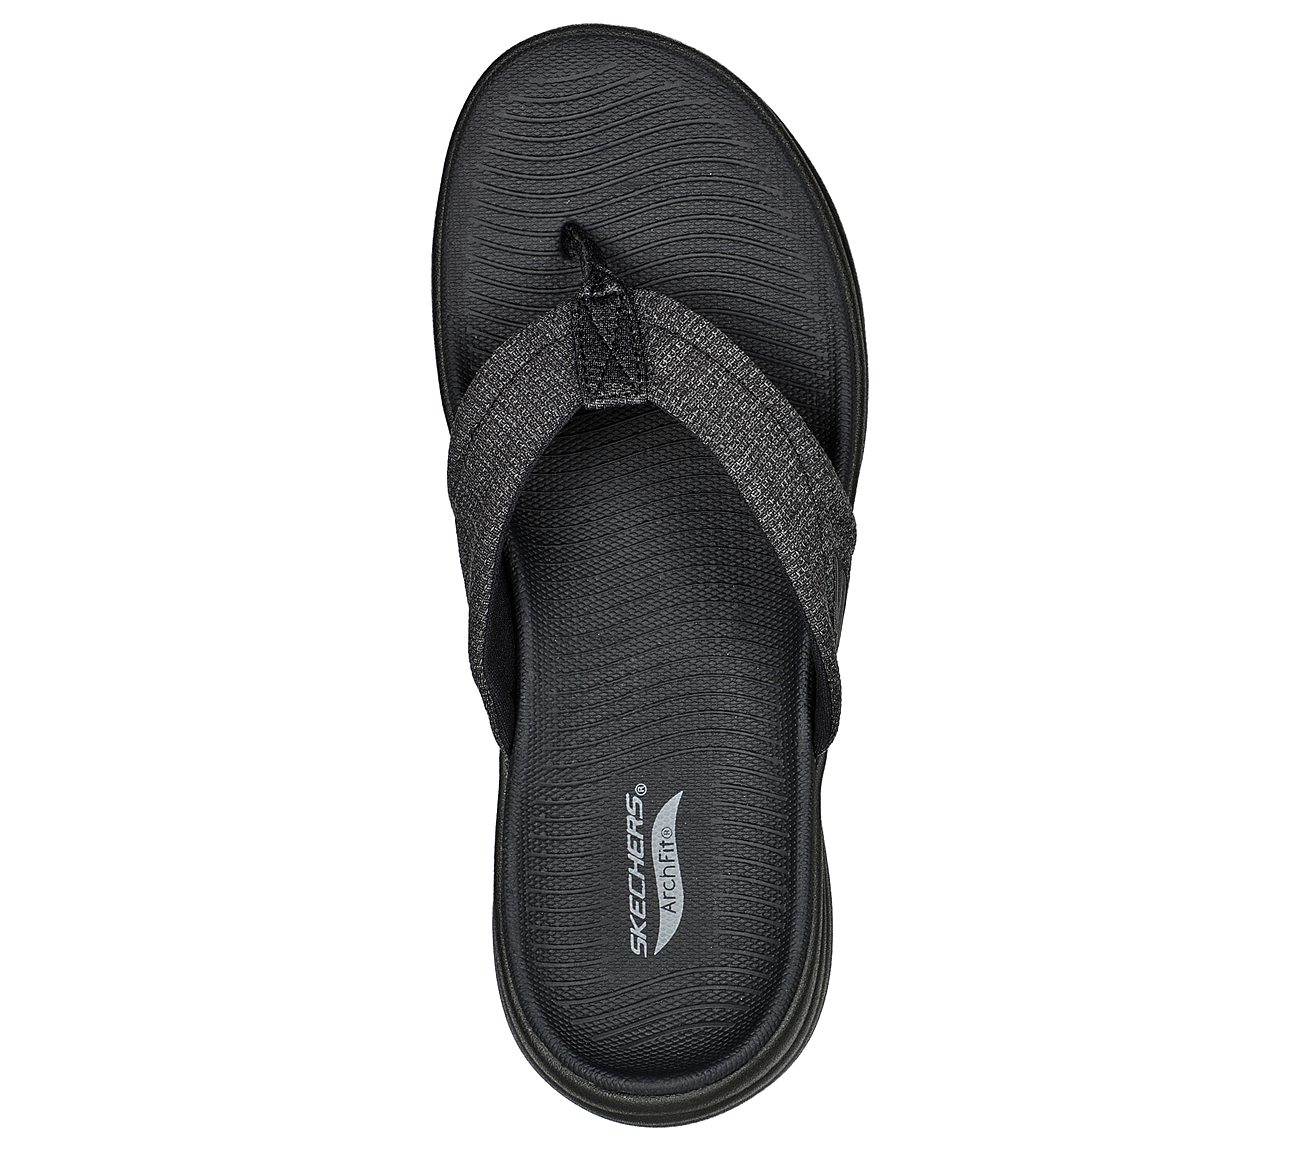 ARCH FIT RADIANCE - GLEAM, BBLACK Footwear Top View